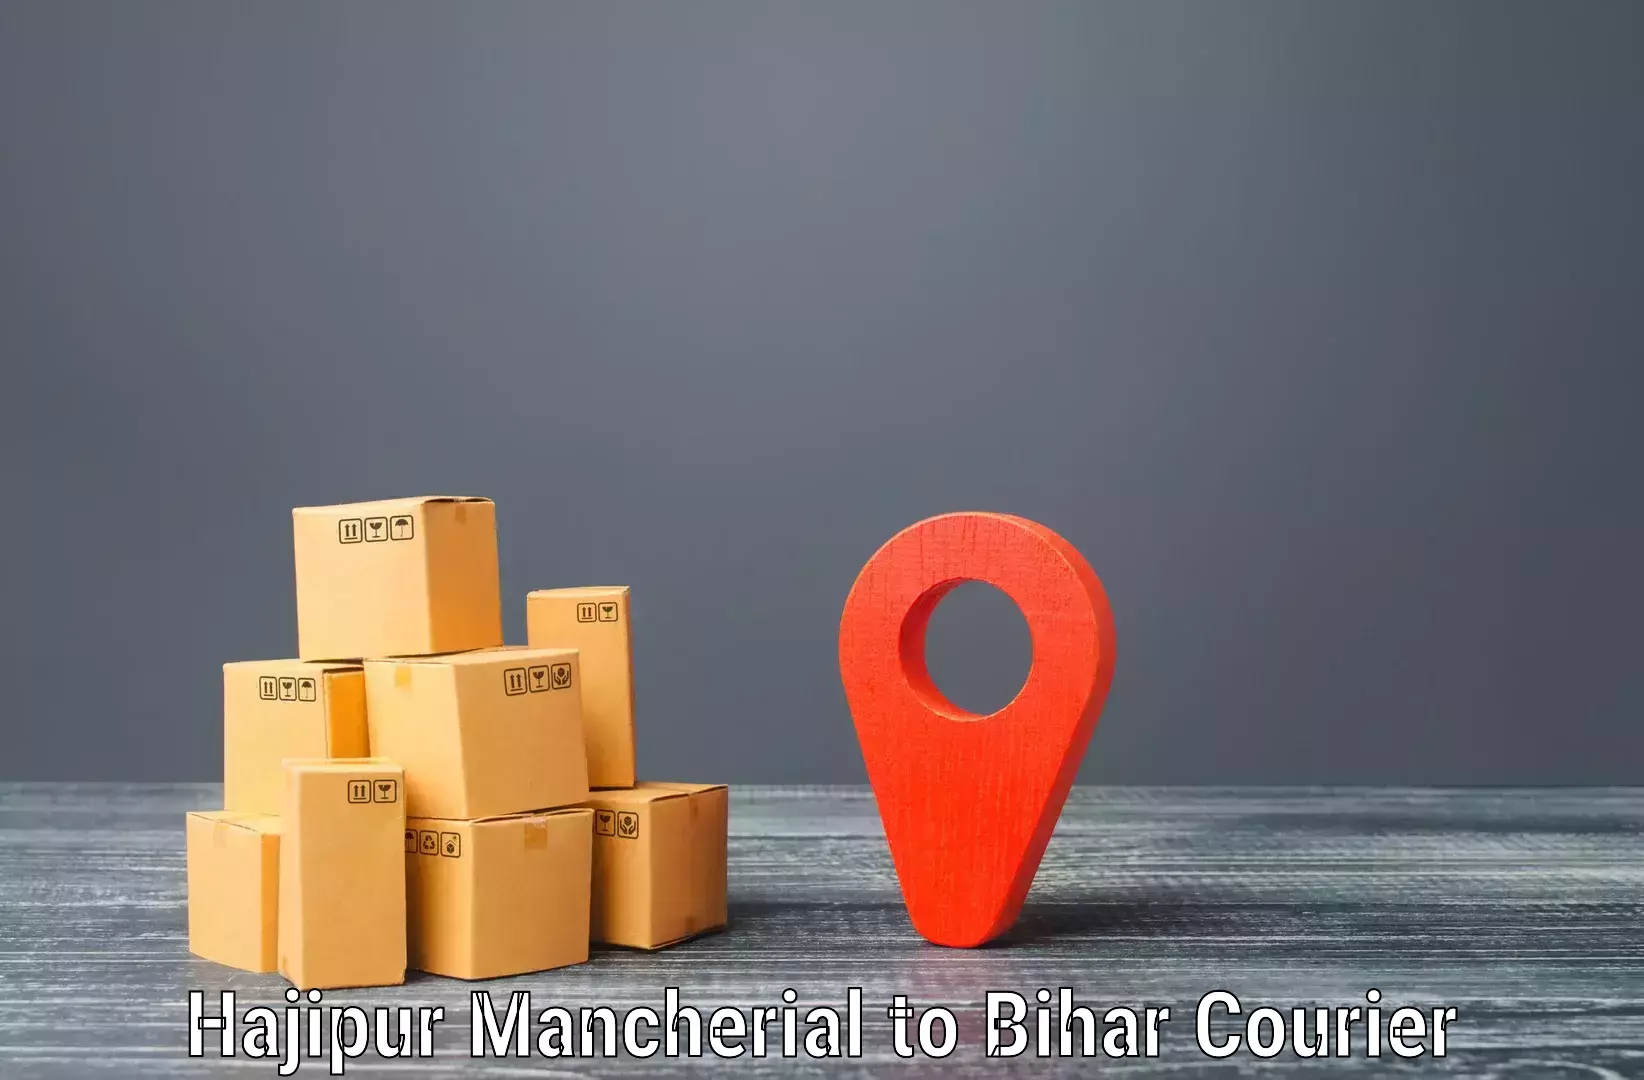 Small business couriers Hajipur Mancherial to Hasanpura